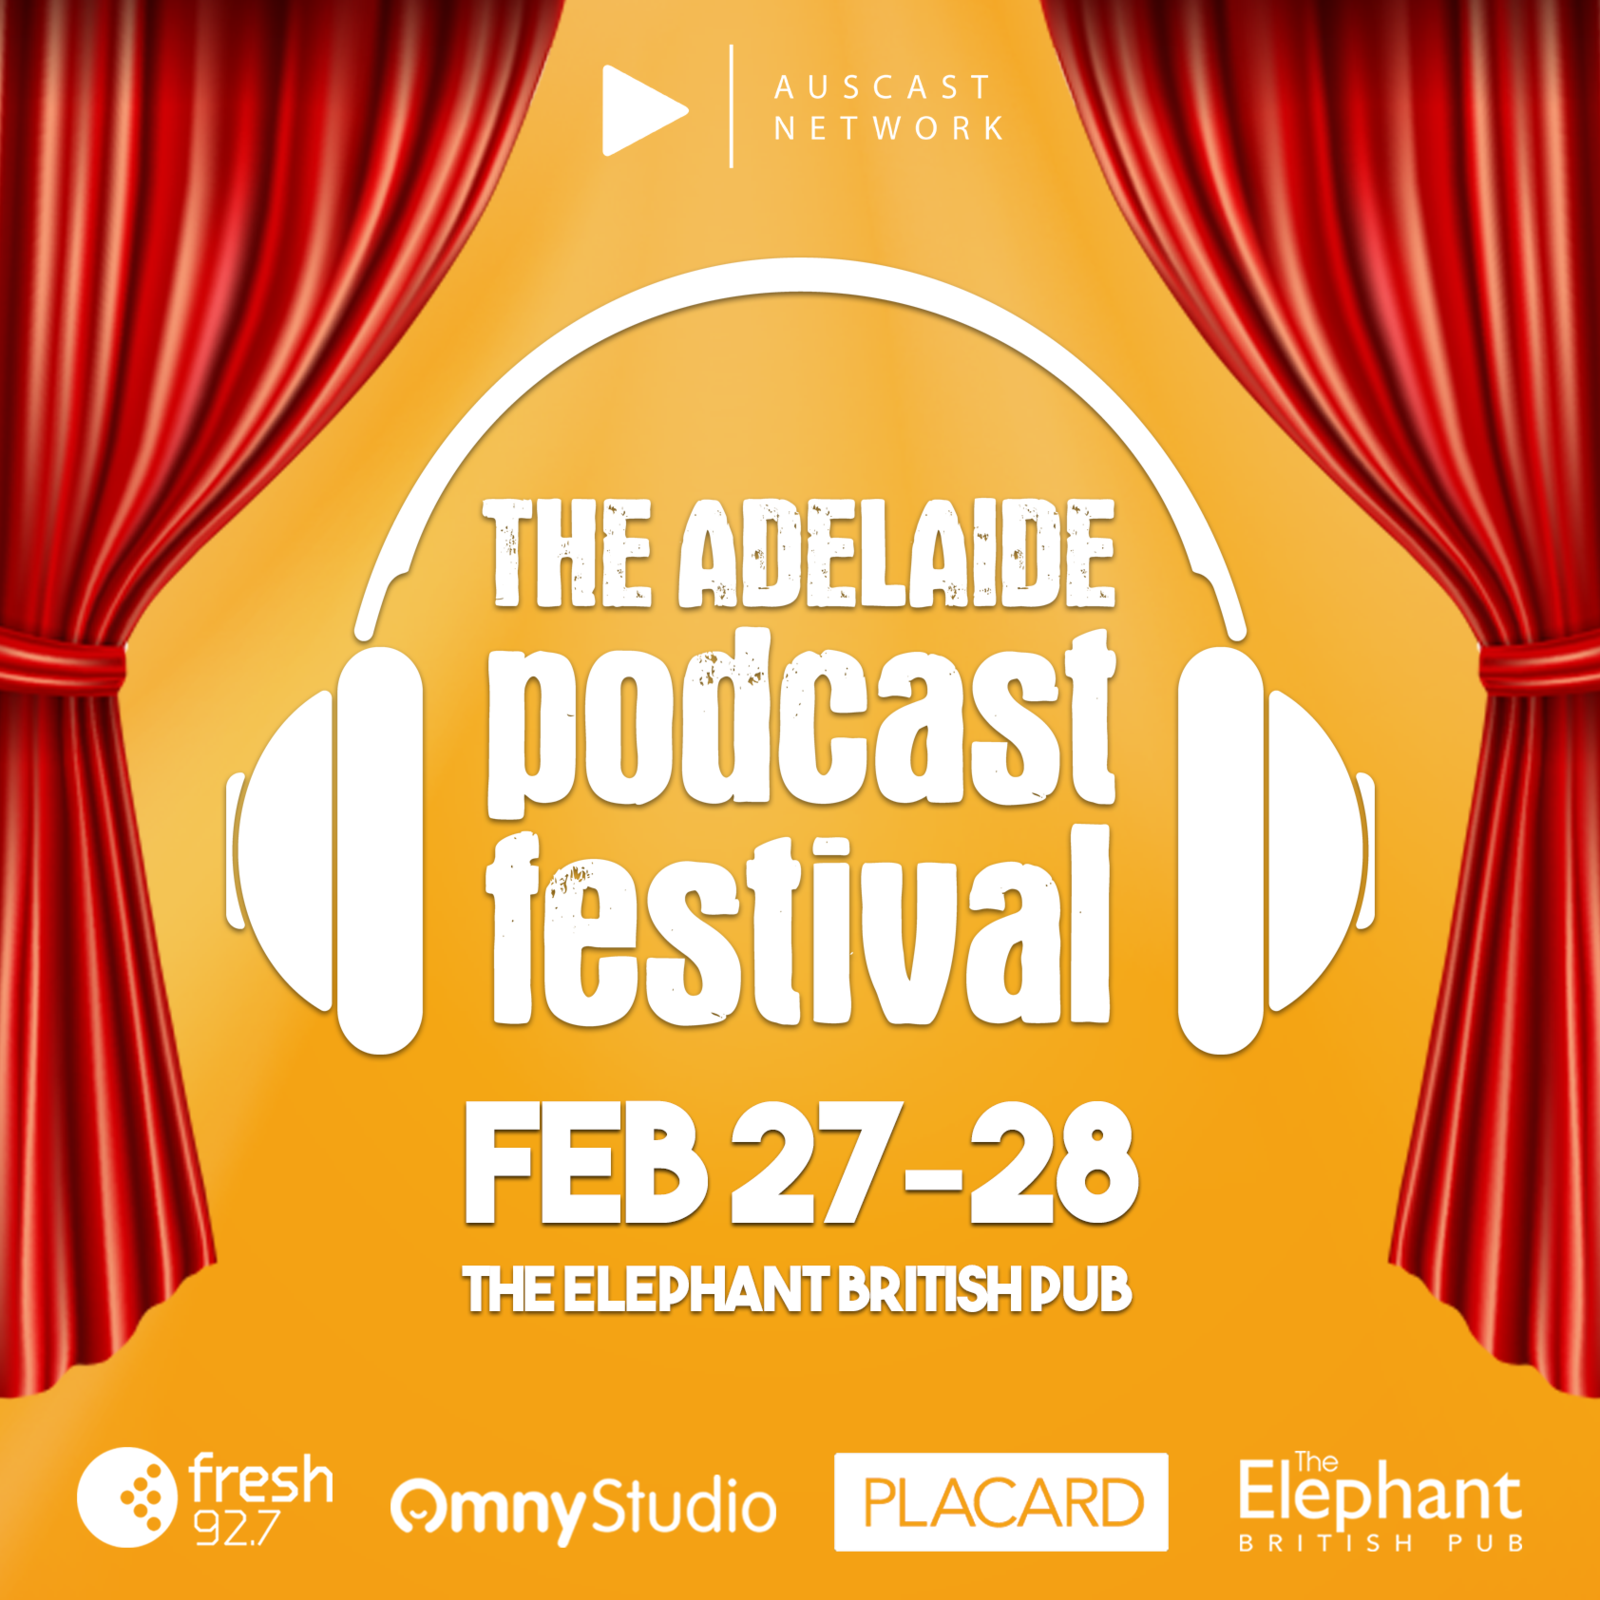 See us recording live at The Adelaide Podcast Festival!